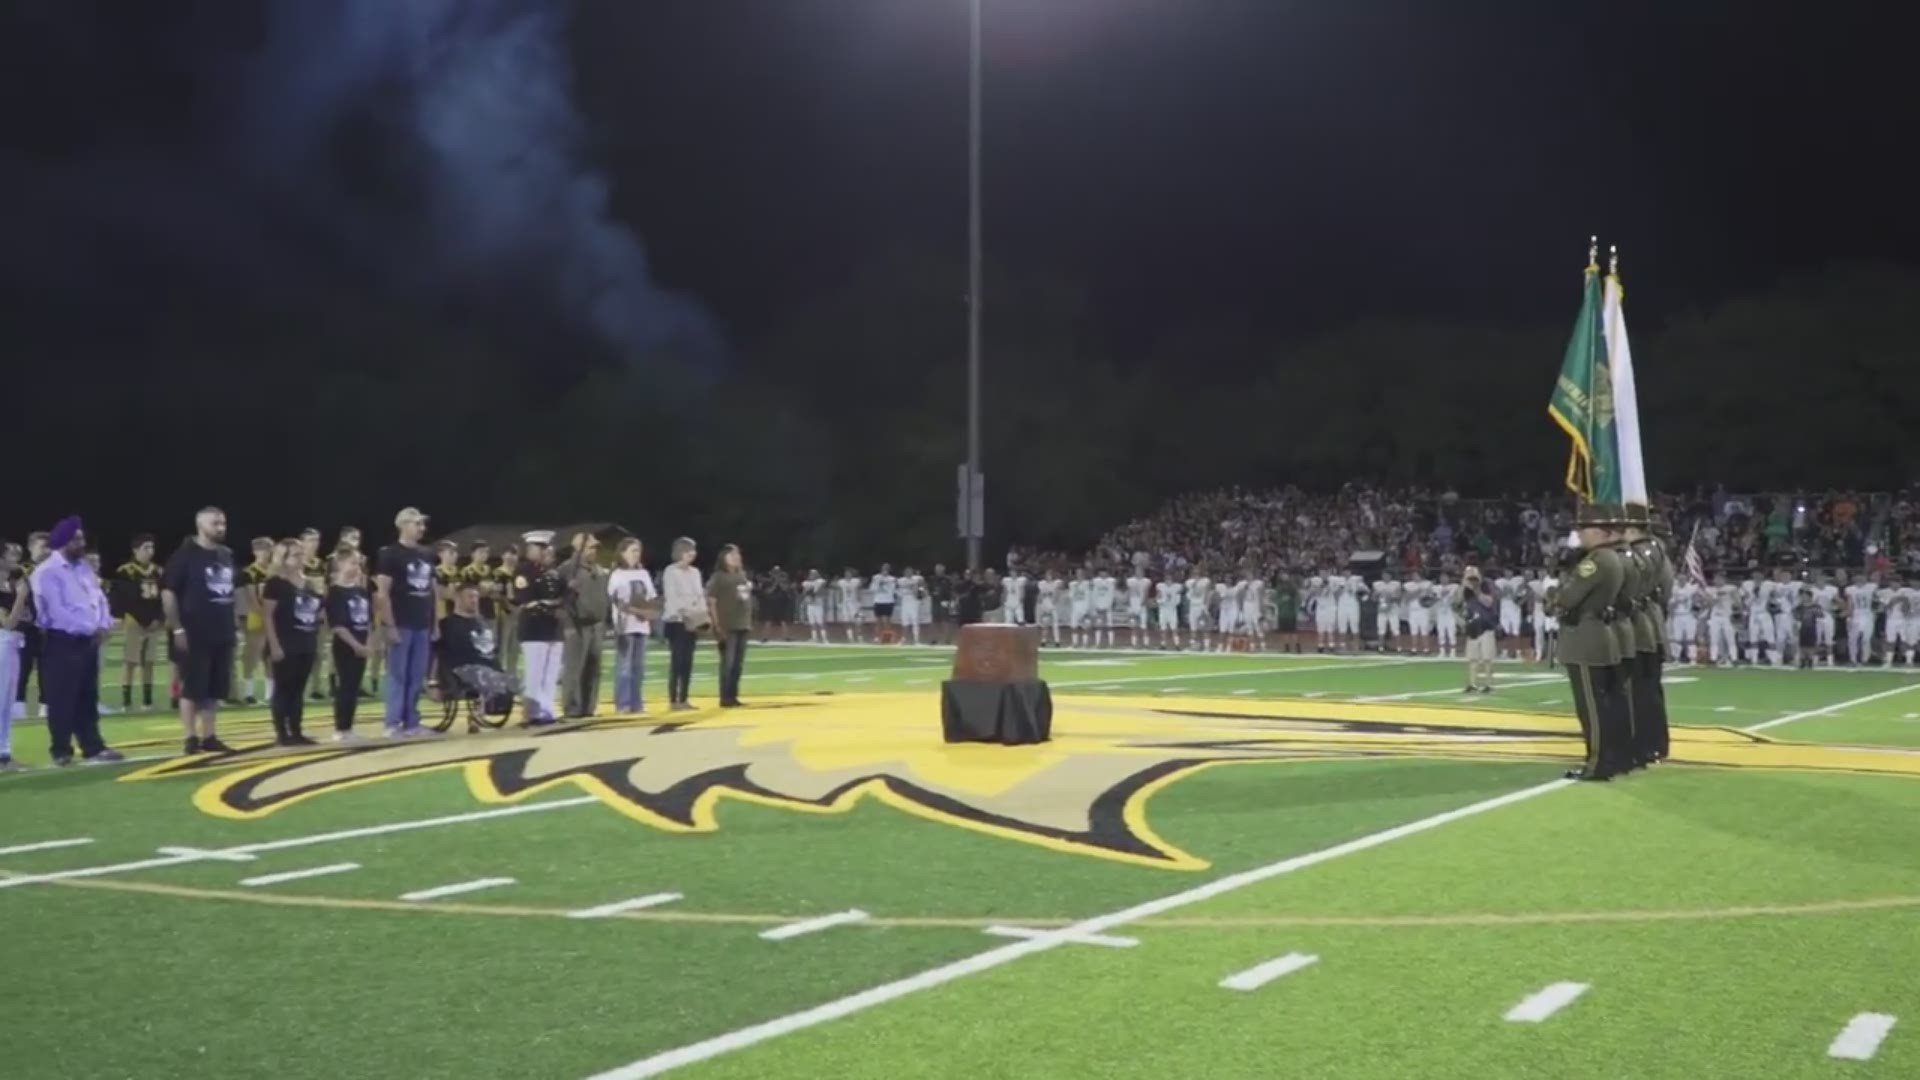 For this week's Fan Game of the Week, John Bartell went to see the Del Oro Golden Eagles square off against the Gr